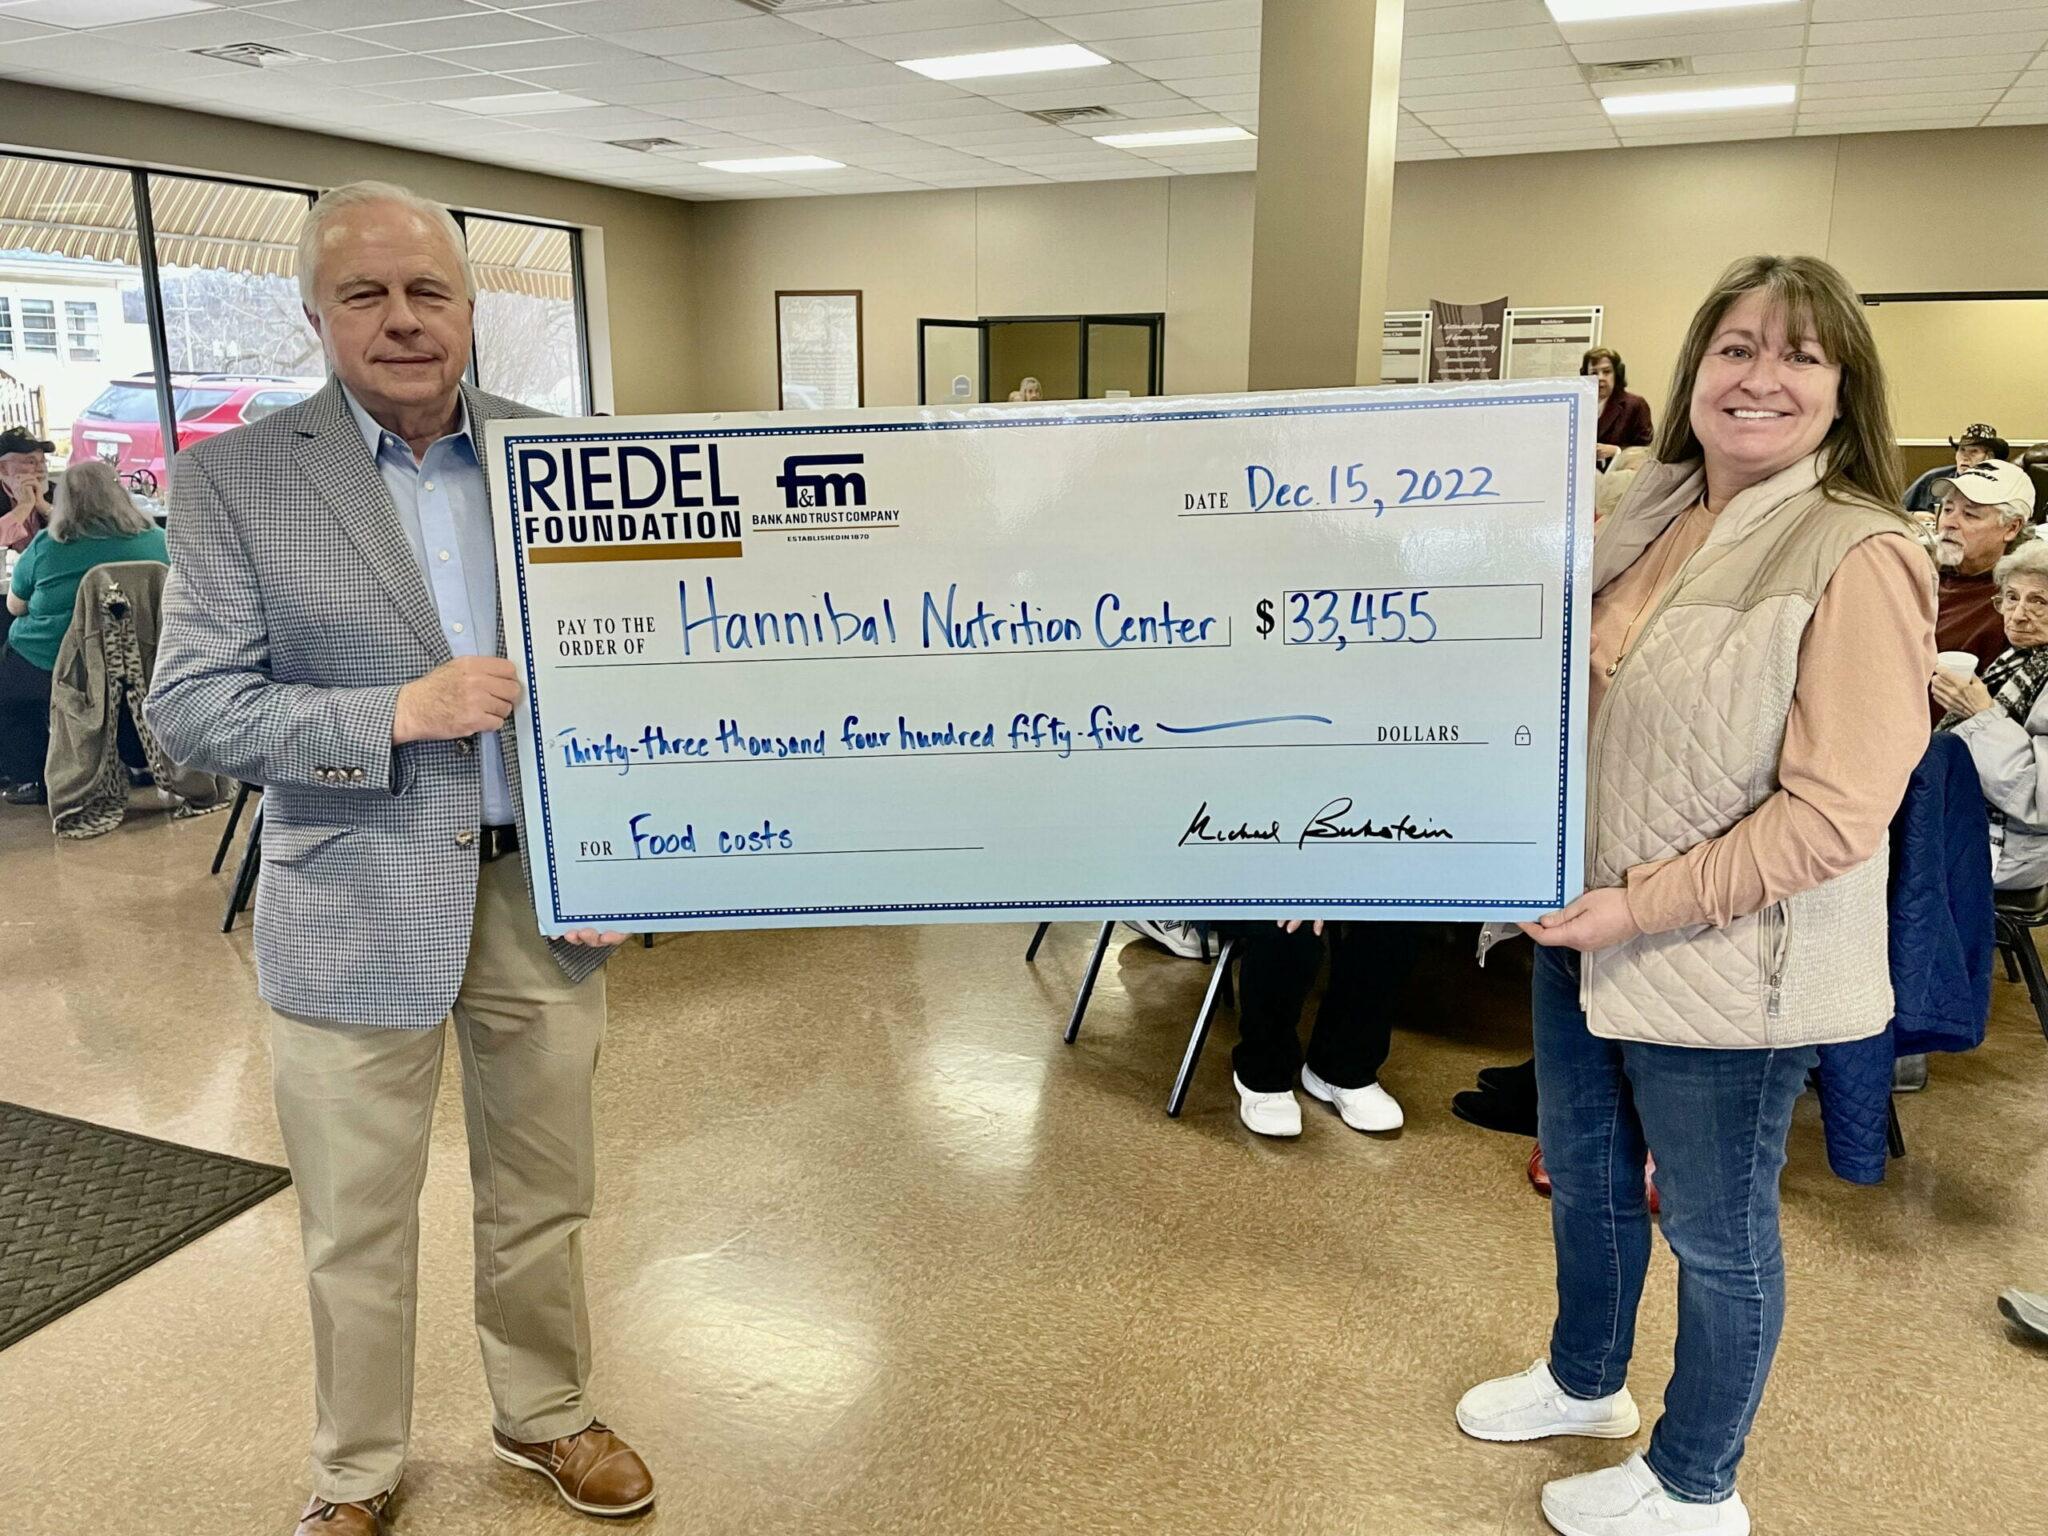 Riedel Foundation Trustee Bill Craigmiles presents a check to Hannibal Nutrition Center Executive Director Margee Tucker at its recent Christmas dinner.